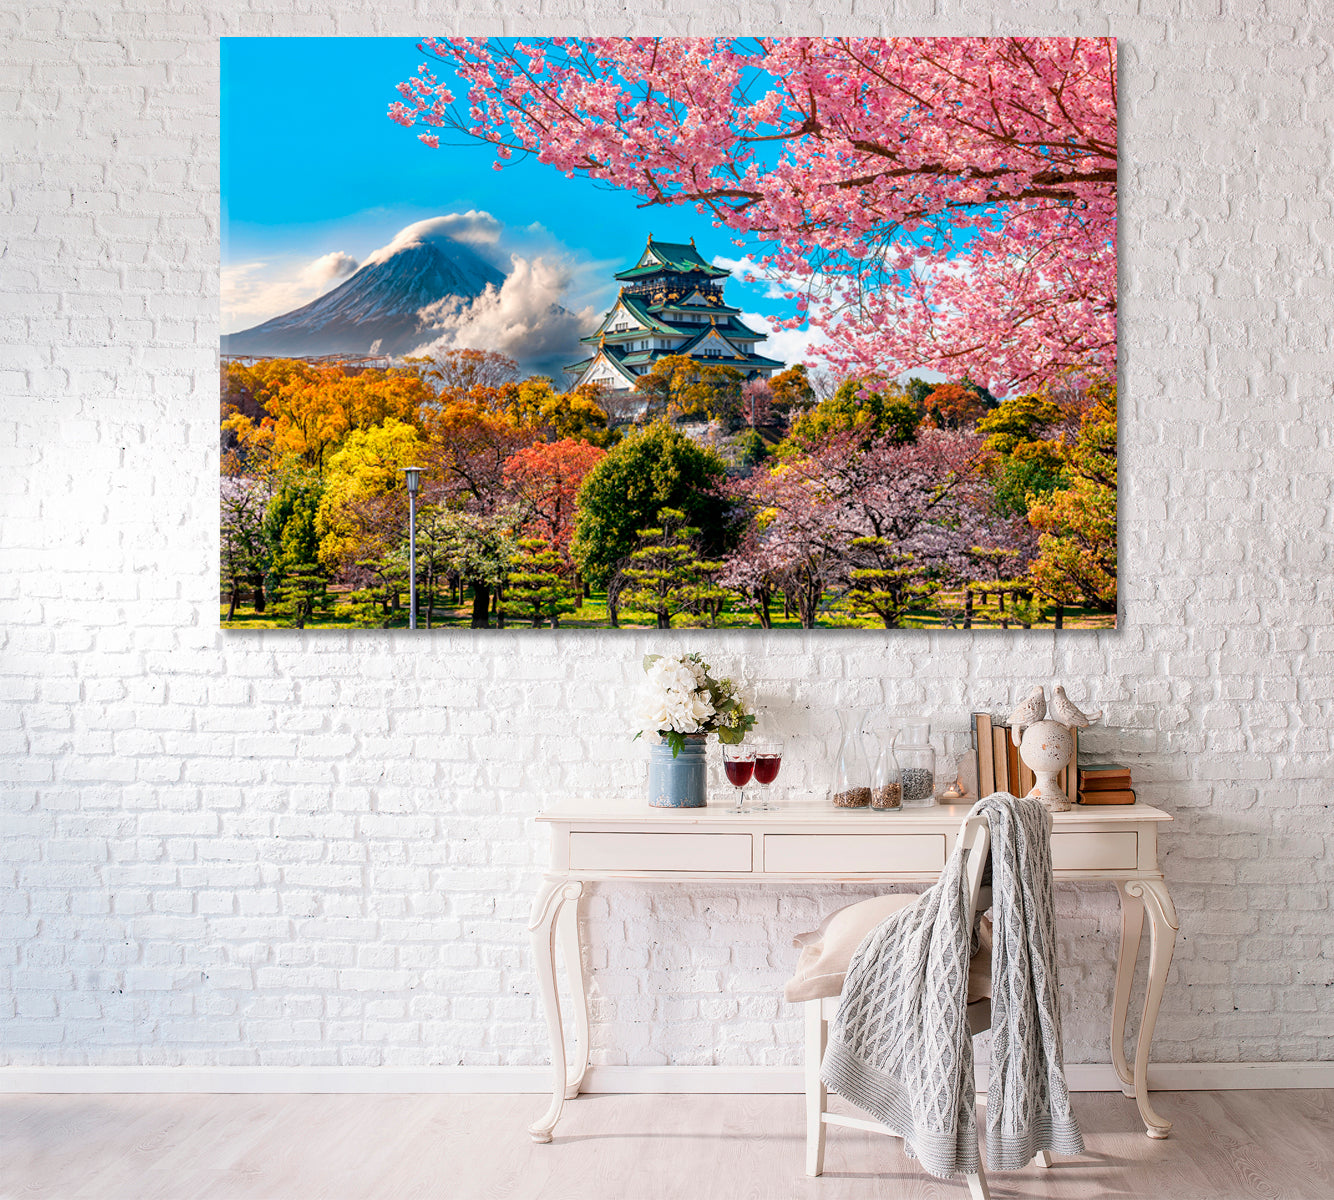 Osaka Castle with Fuji Mountain Japan Canvas Print ArtLexy 1 Panel 24"x16" inches 